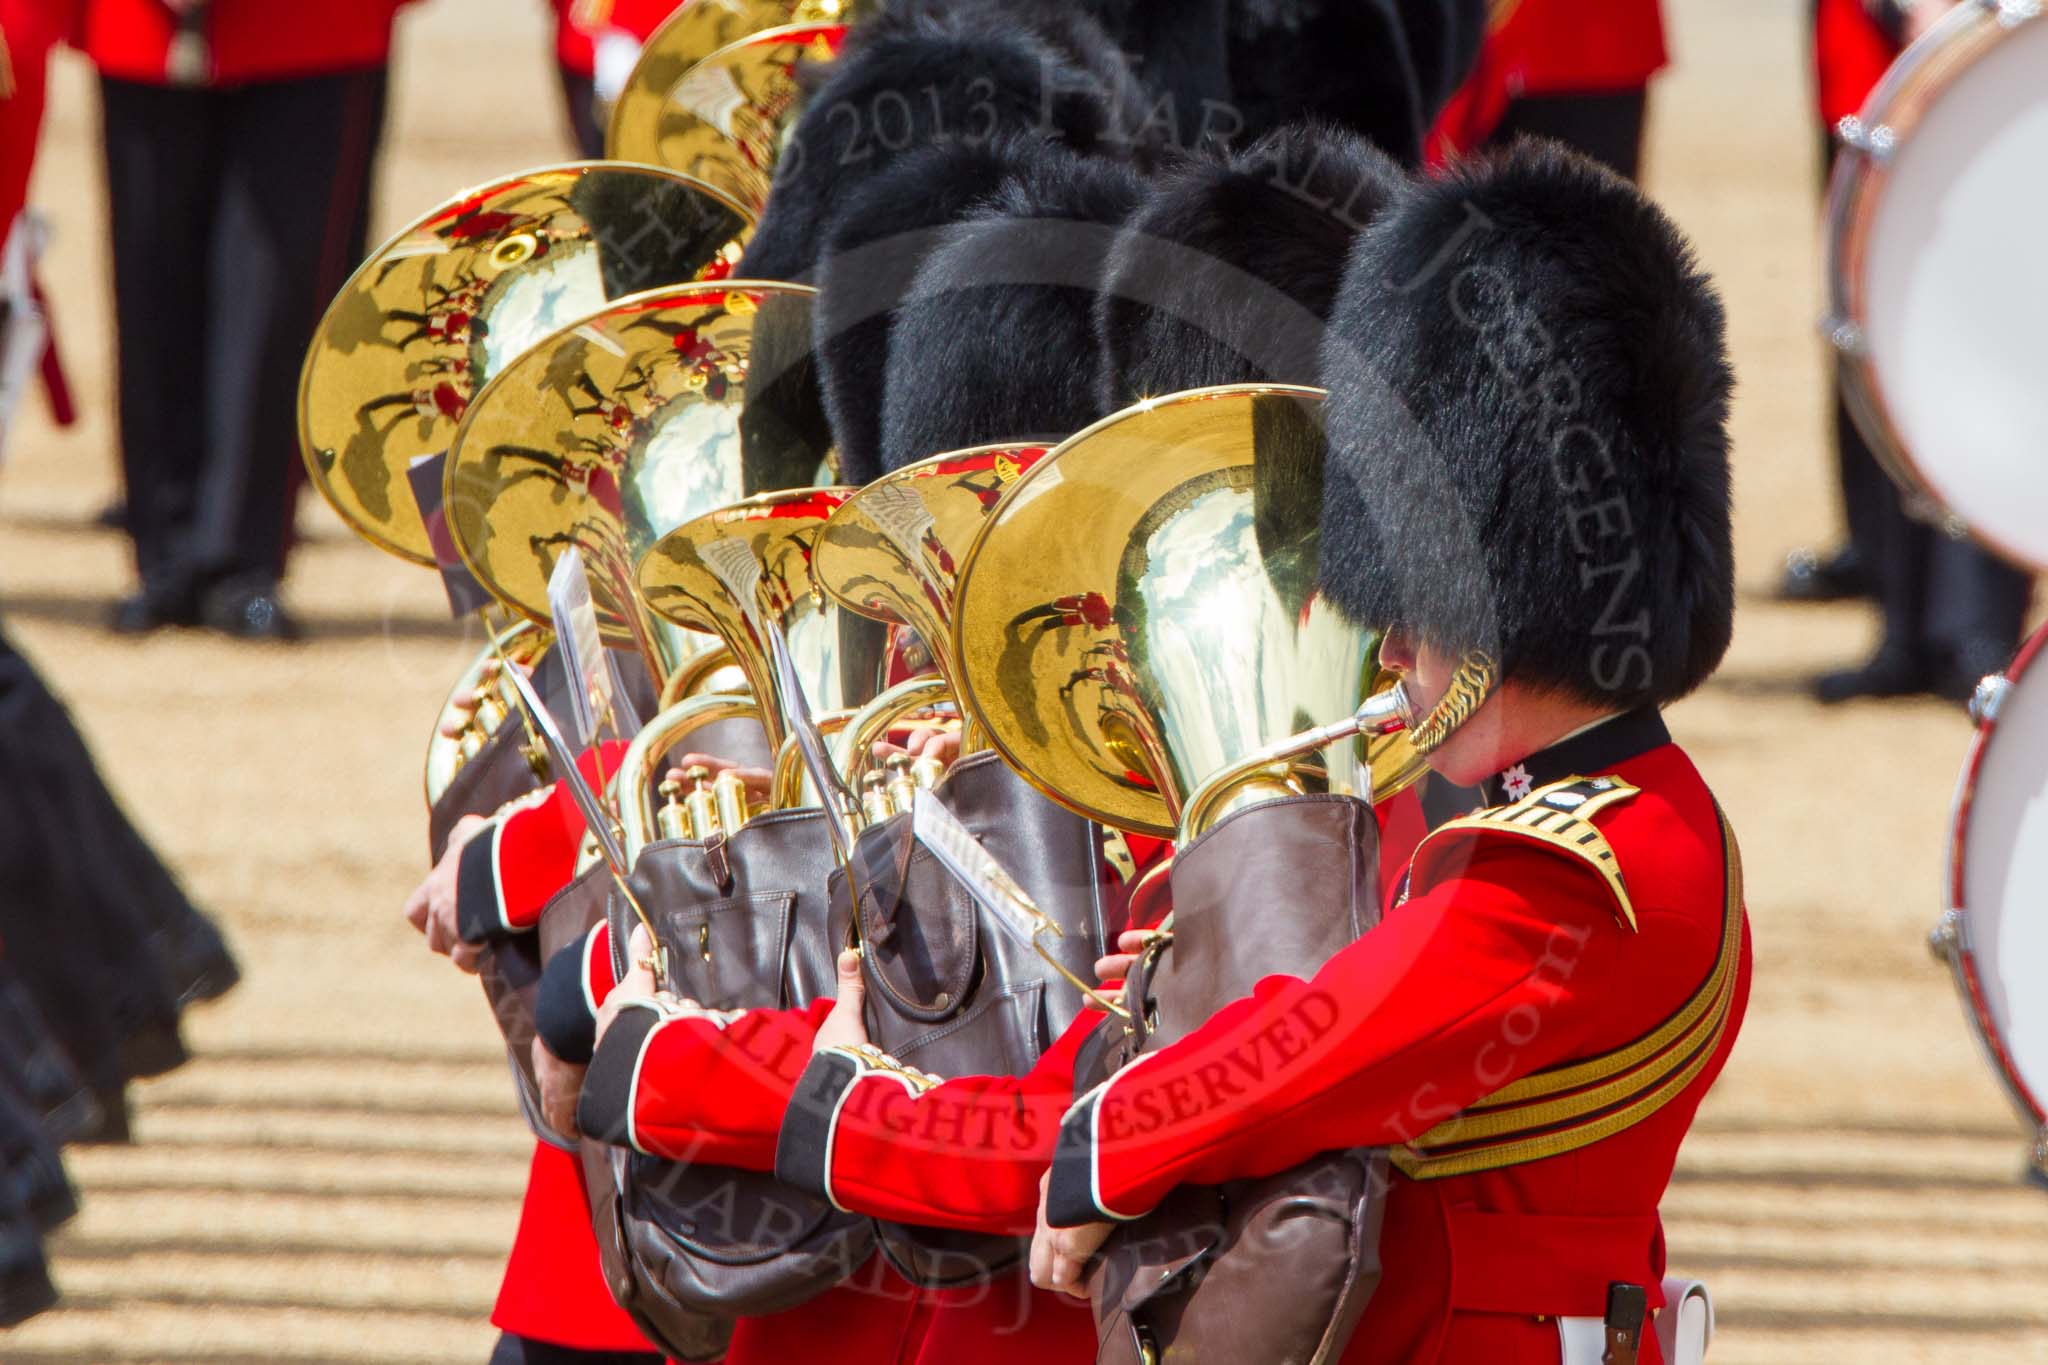 The Colonel's Review 2013: Tthe Massed Bands as they are playing the Grenadiers Slow March..
Horse Guards Parade, Westminster,
London SW1,

United Kingdom,
on 08 June 2013 at 11:23, image #563